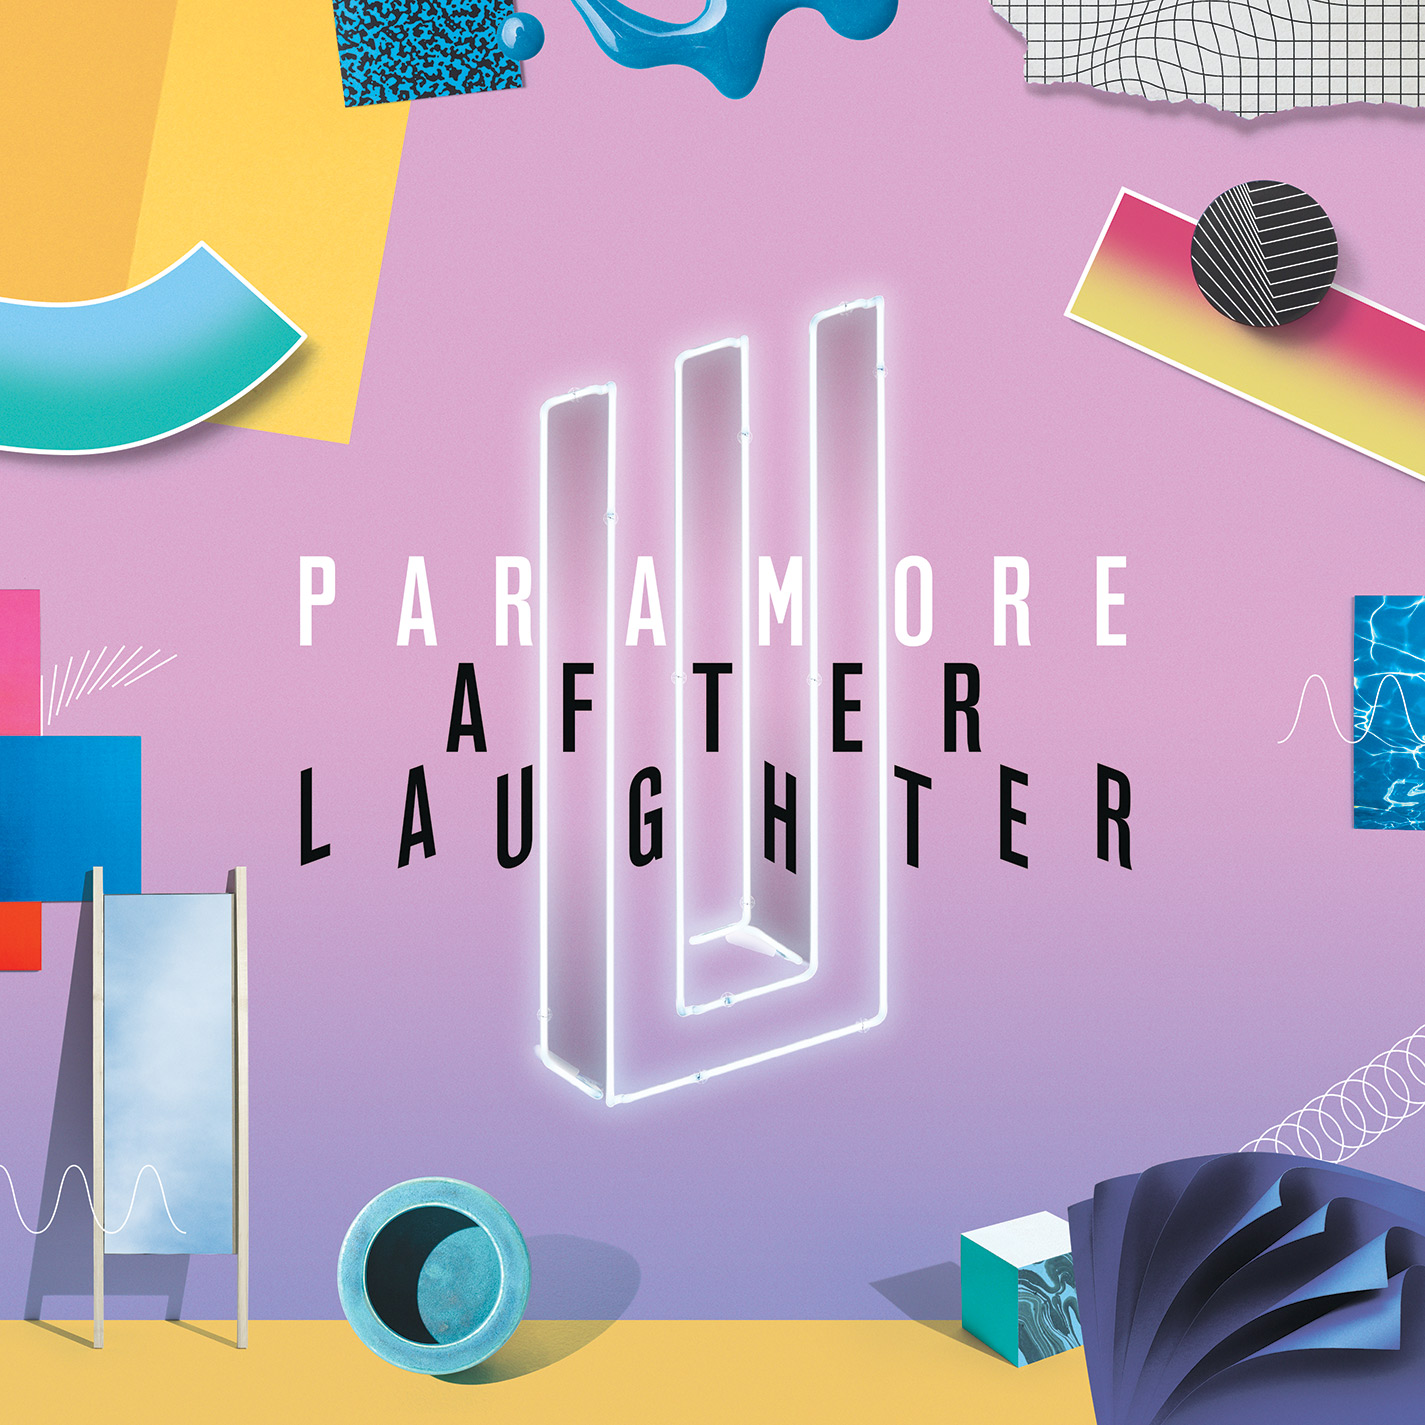 Paramore announce new album ‘After Laughter’, hear new track ‘Hard Times’